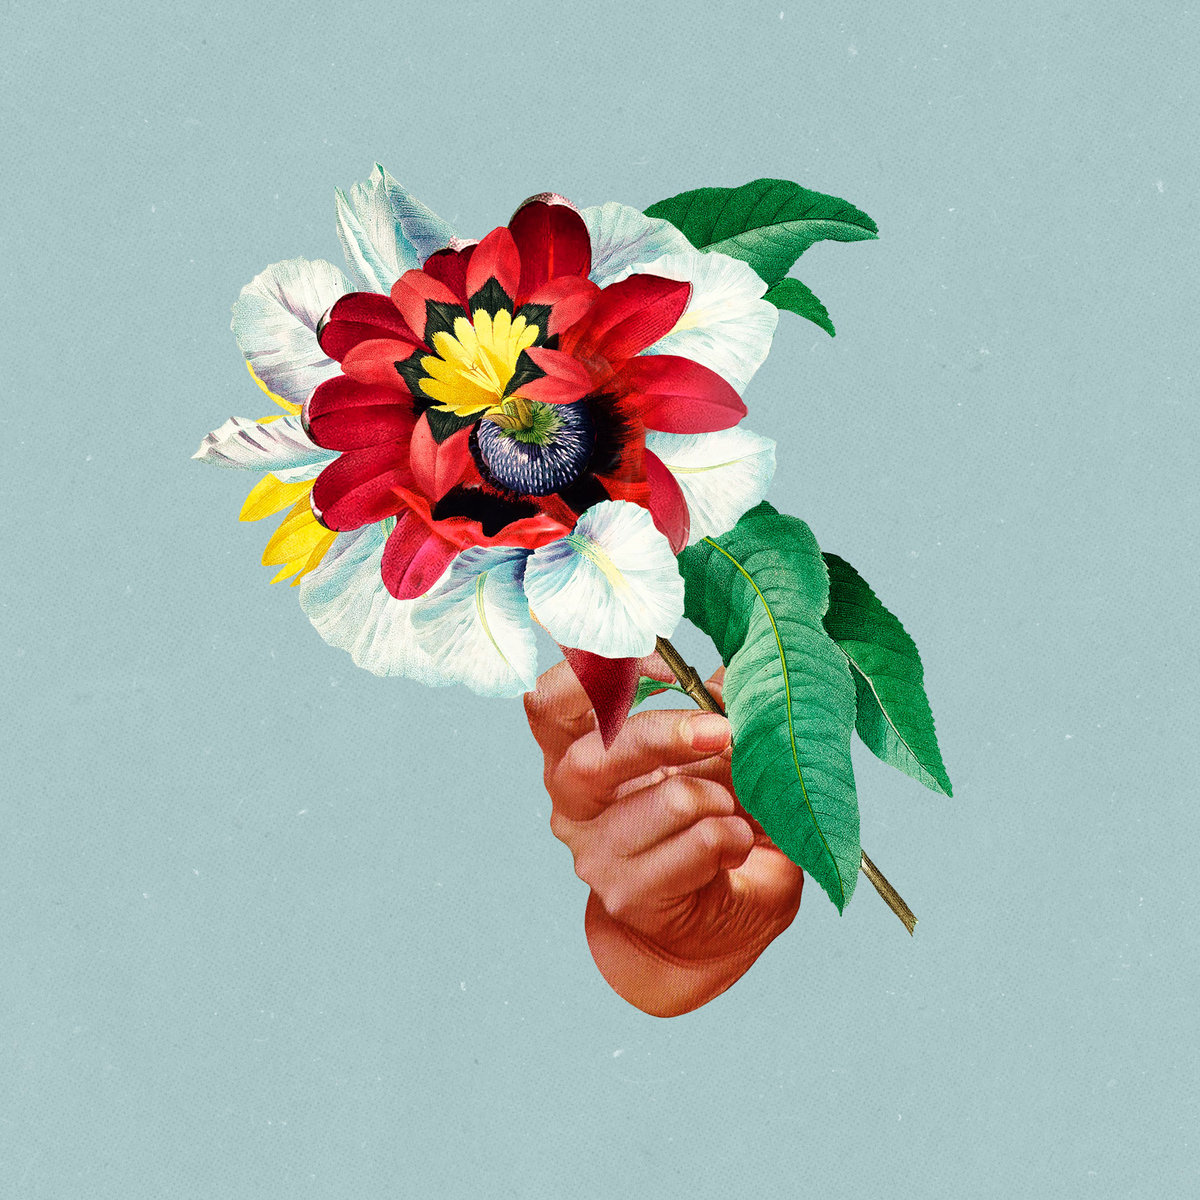 Maribou State - Kingdoms in Colour (2018)